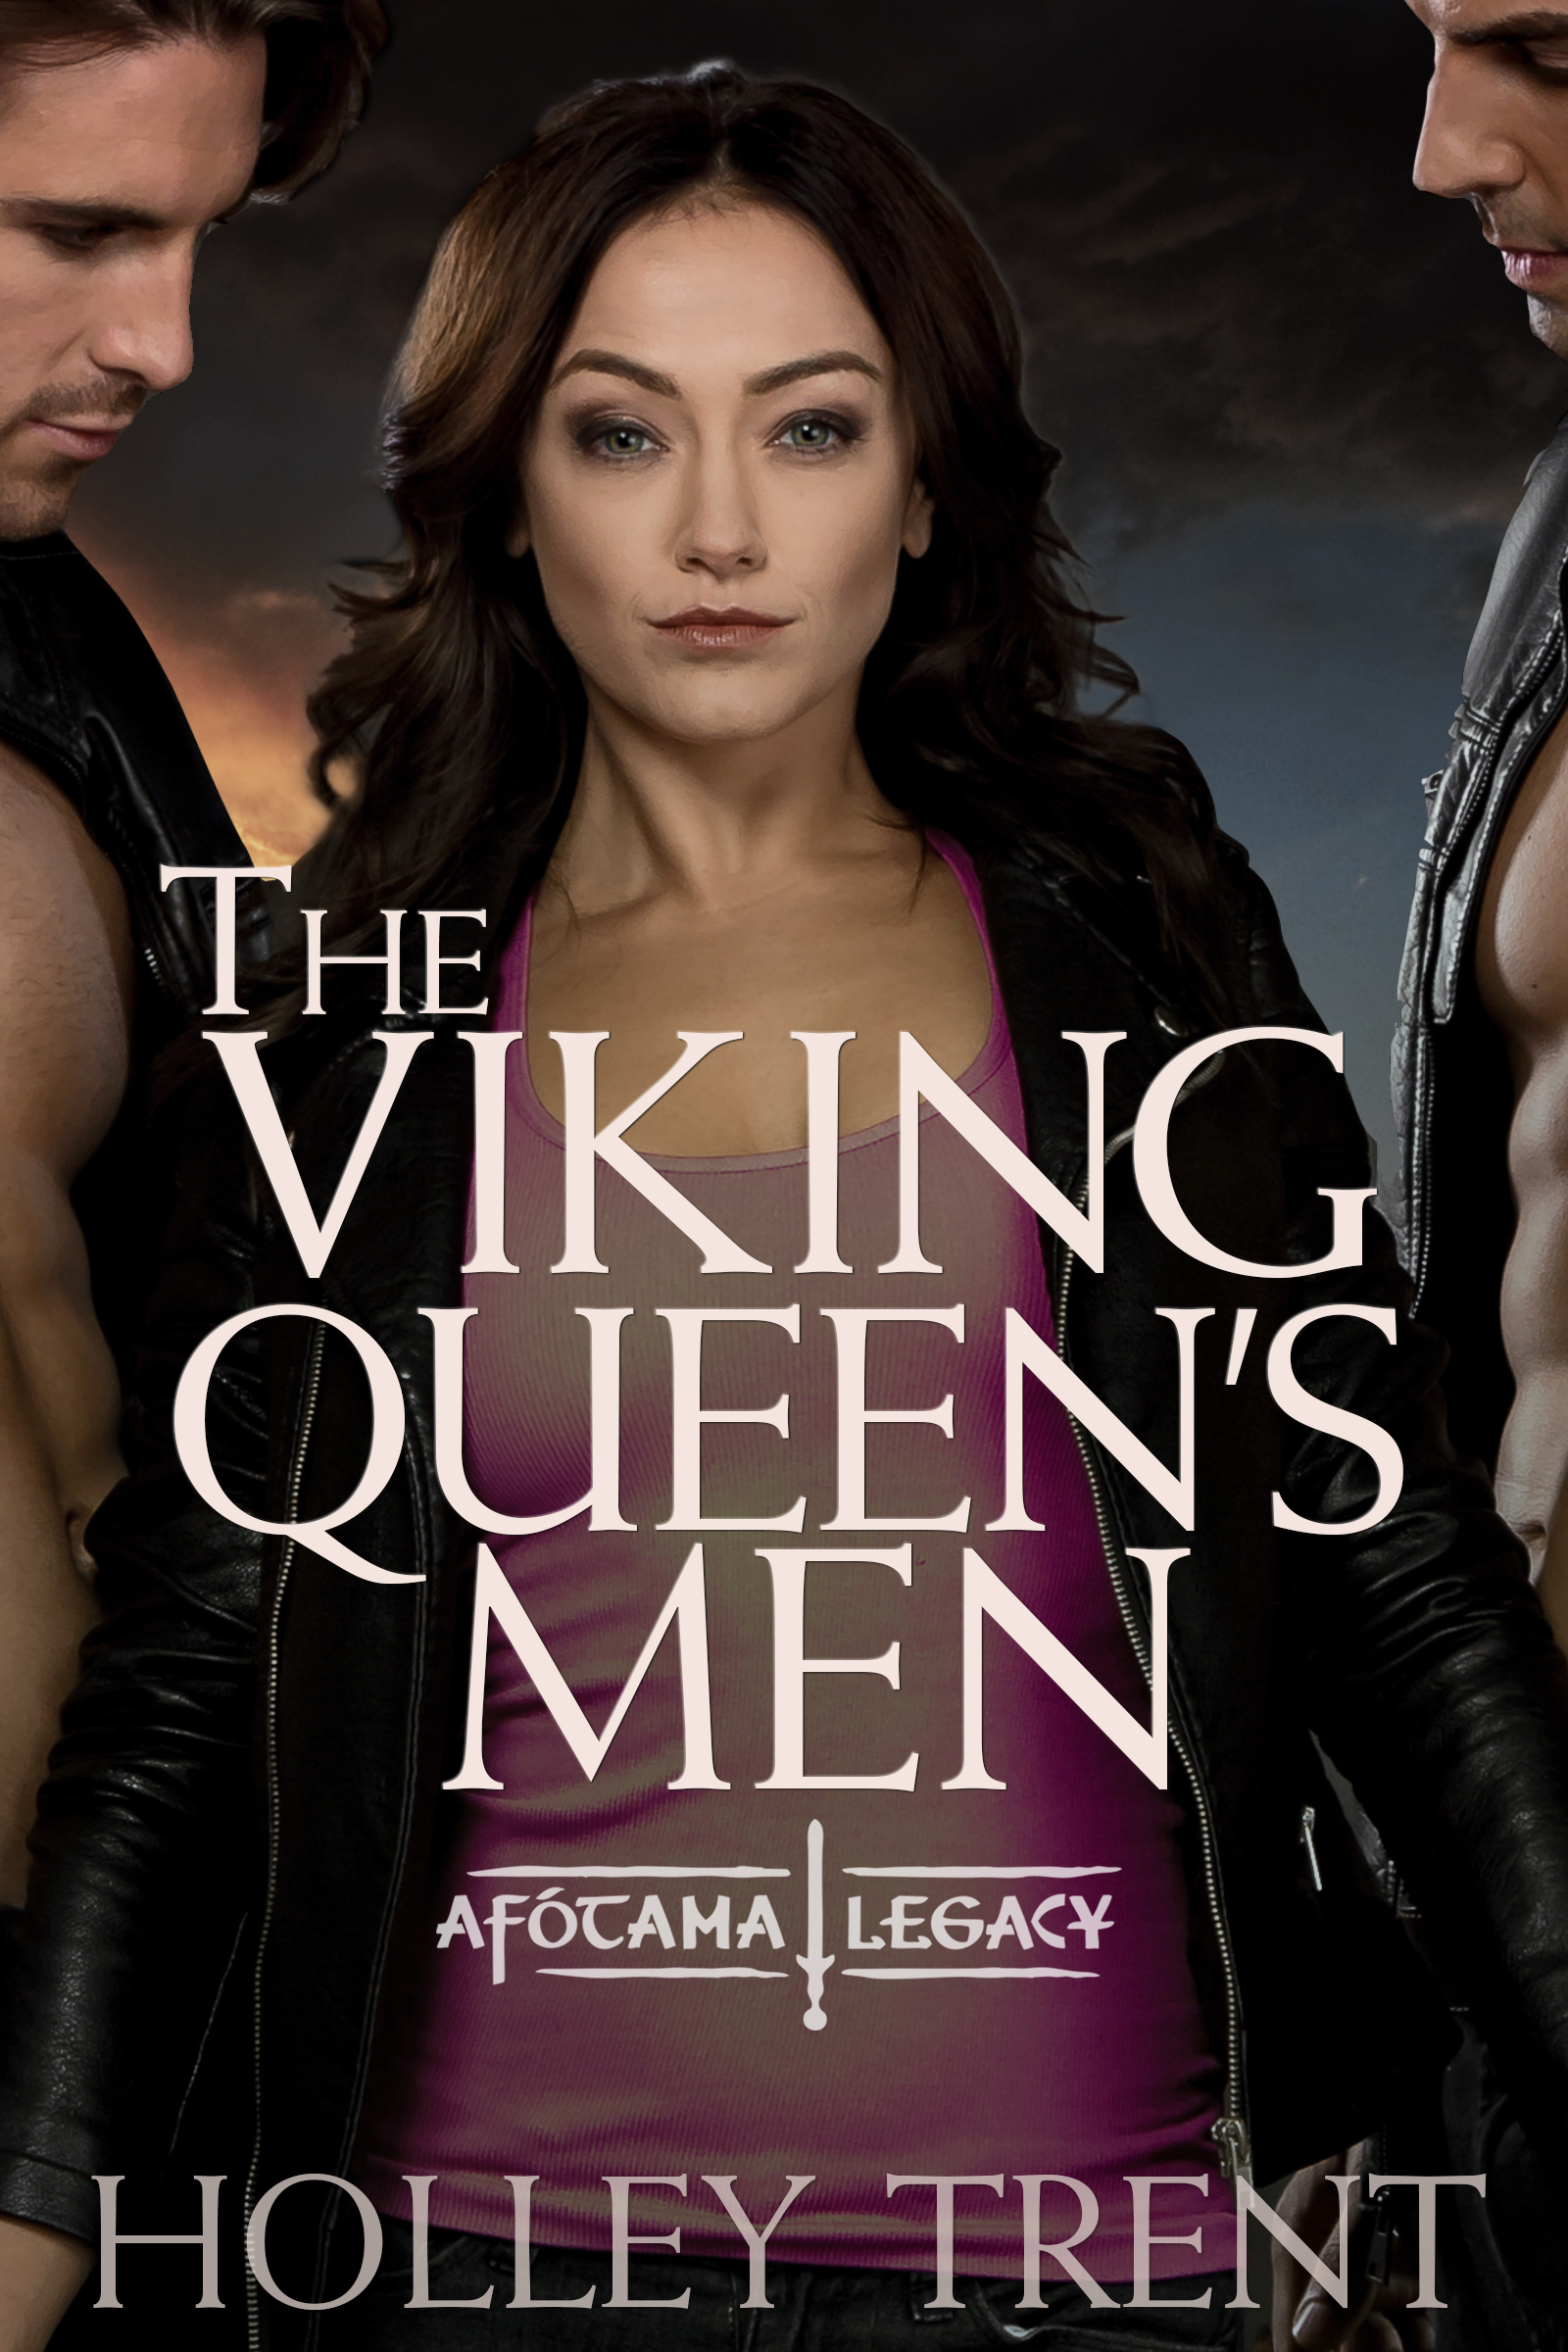 new cover of The Viking Queen's Men. Has a dark-haired woman at center flanked by two tall men. Background is a setting-sun sky in the desert.